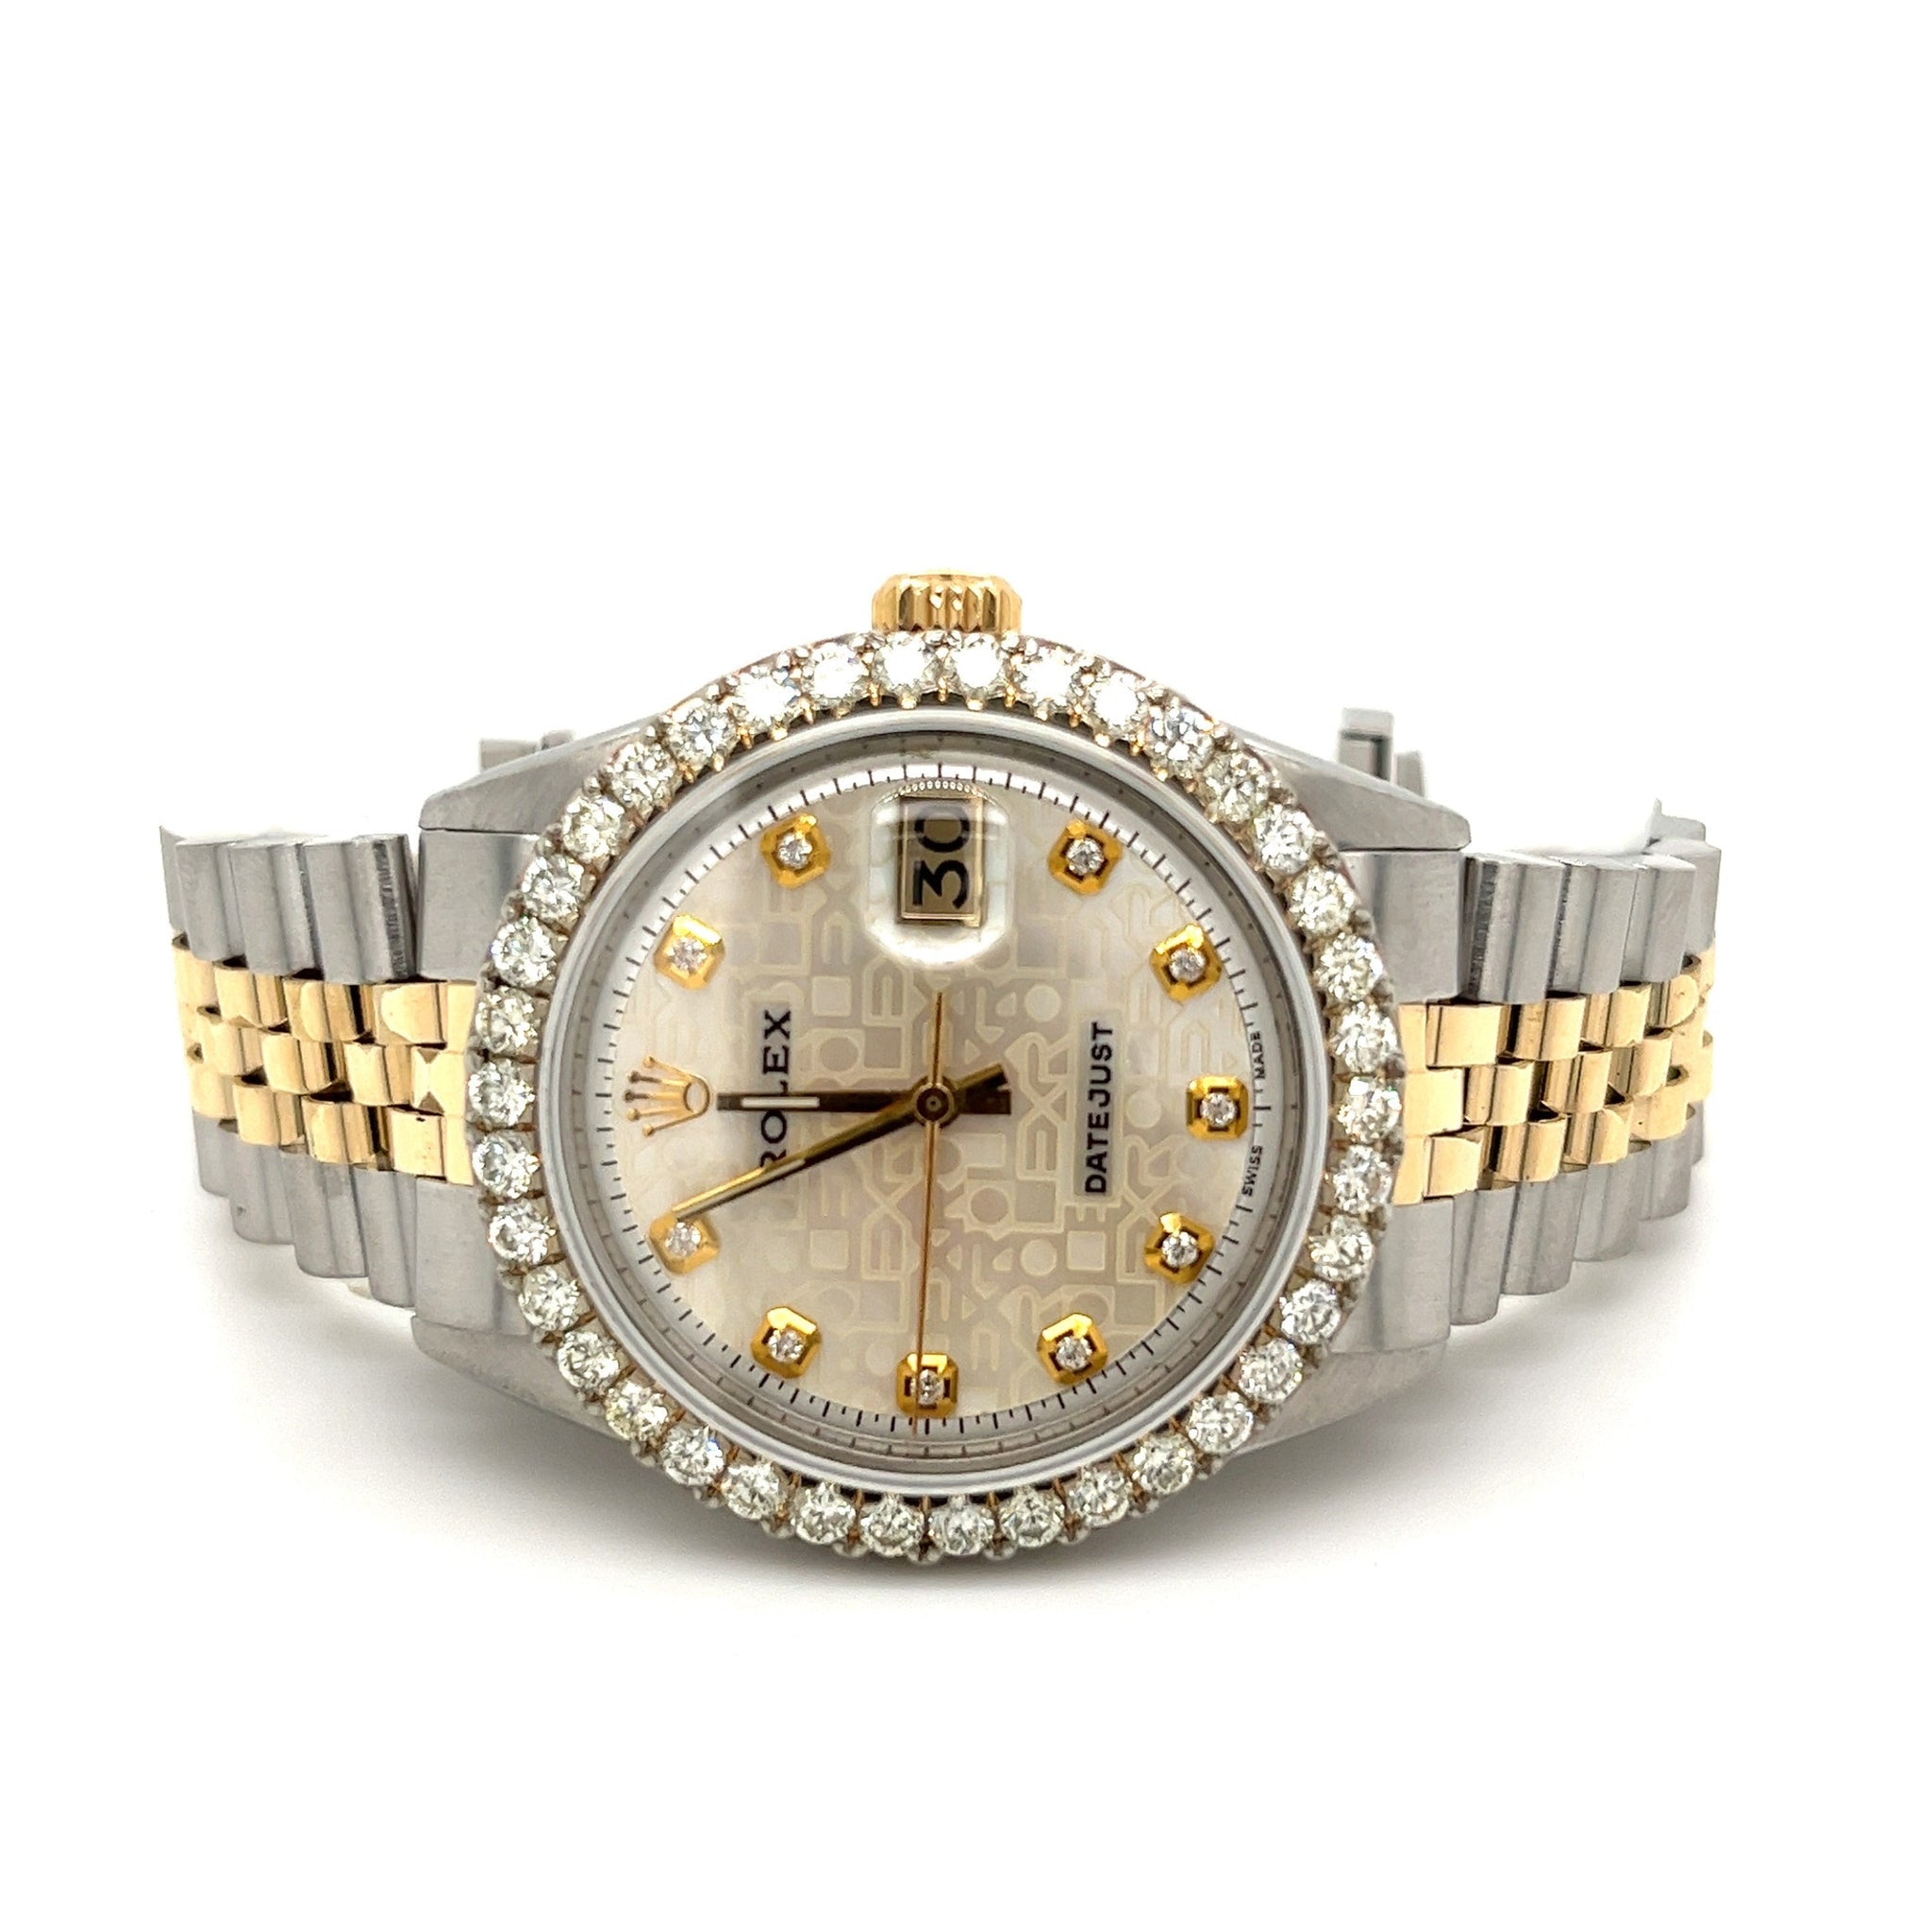 Rolex 36mm DateJust White Jubilee Dial Ref. 1601 With Diamond Bezel-Watches-ASSAY